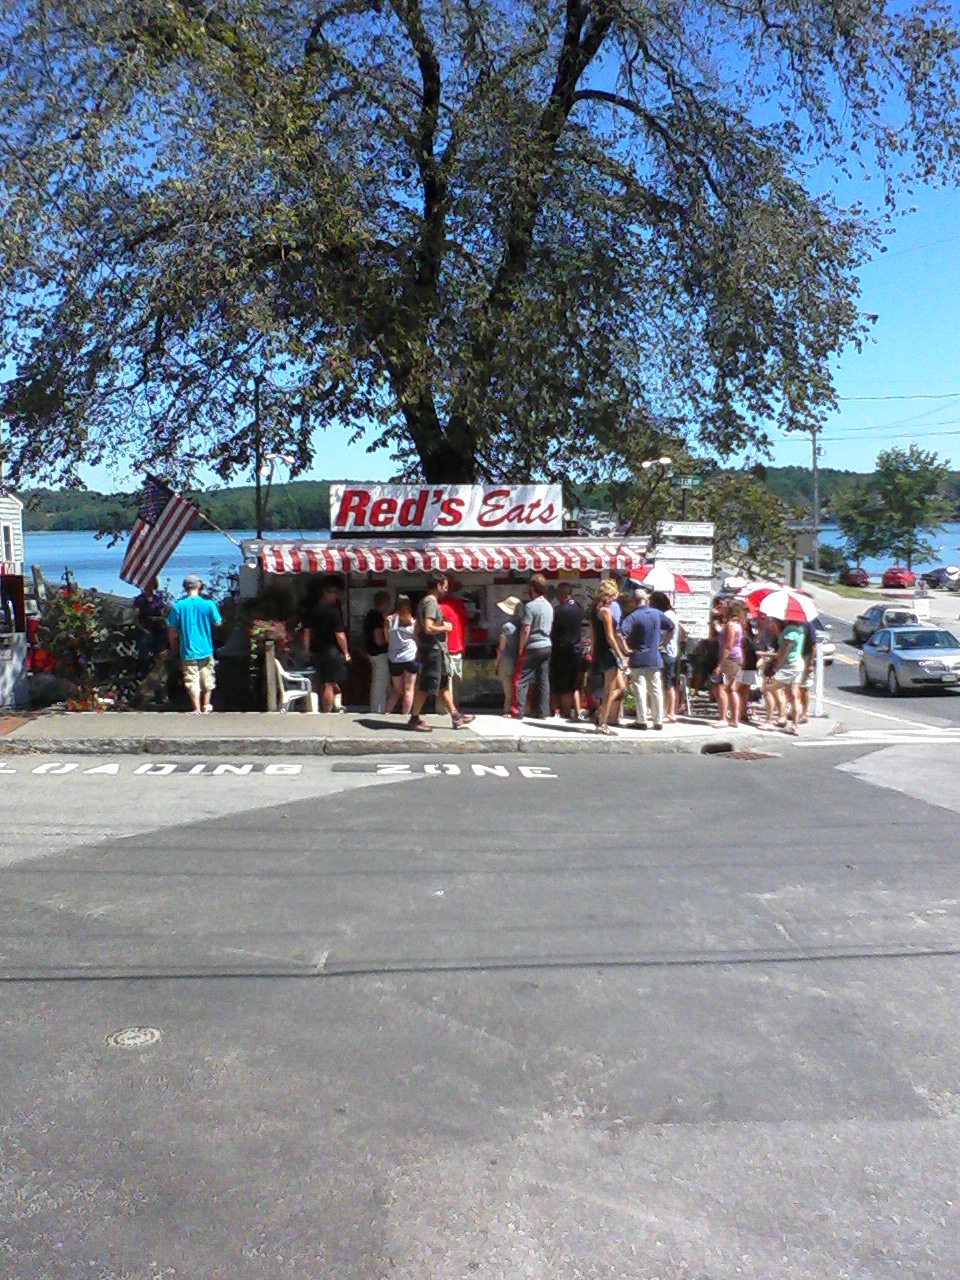 A view of people coming to the stall of the Red's Eats early in the morning.